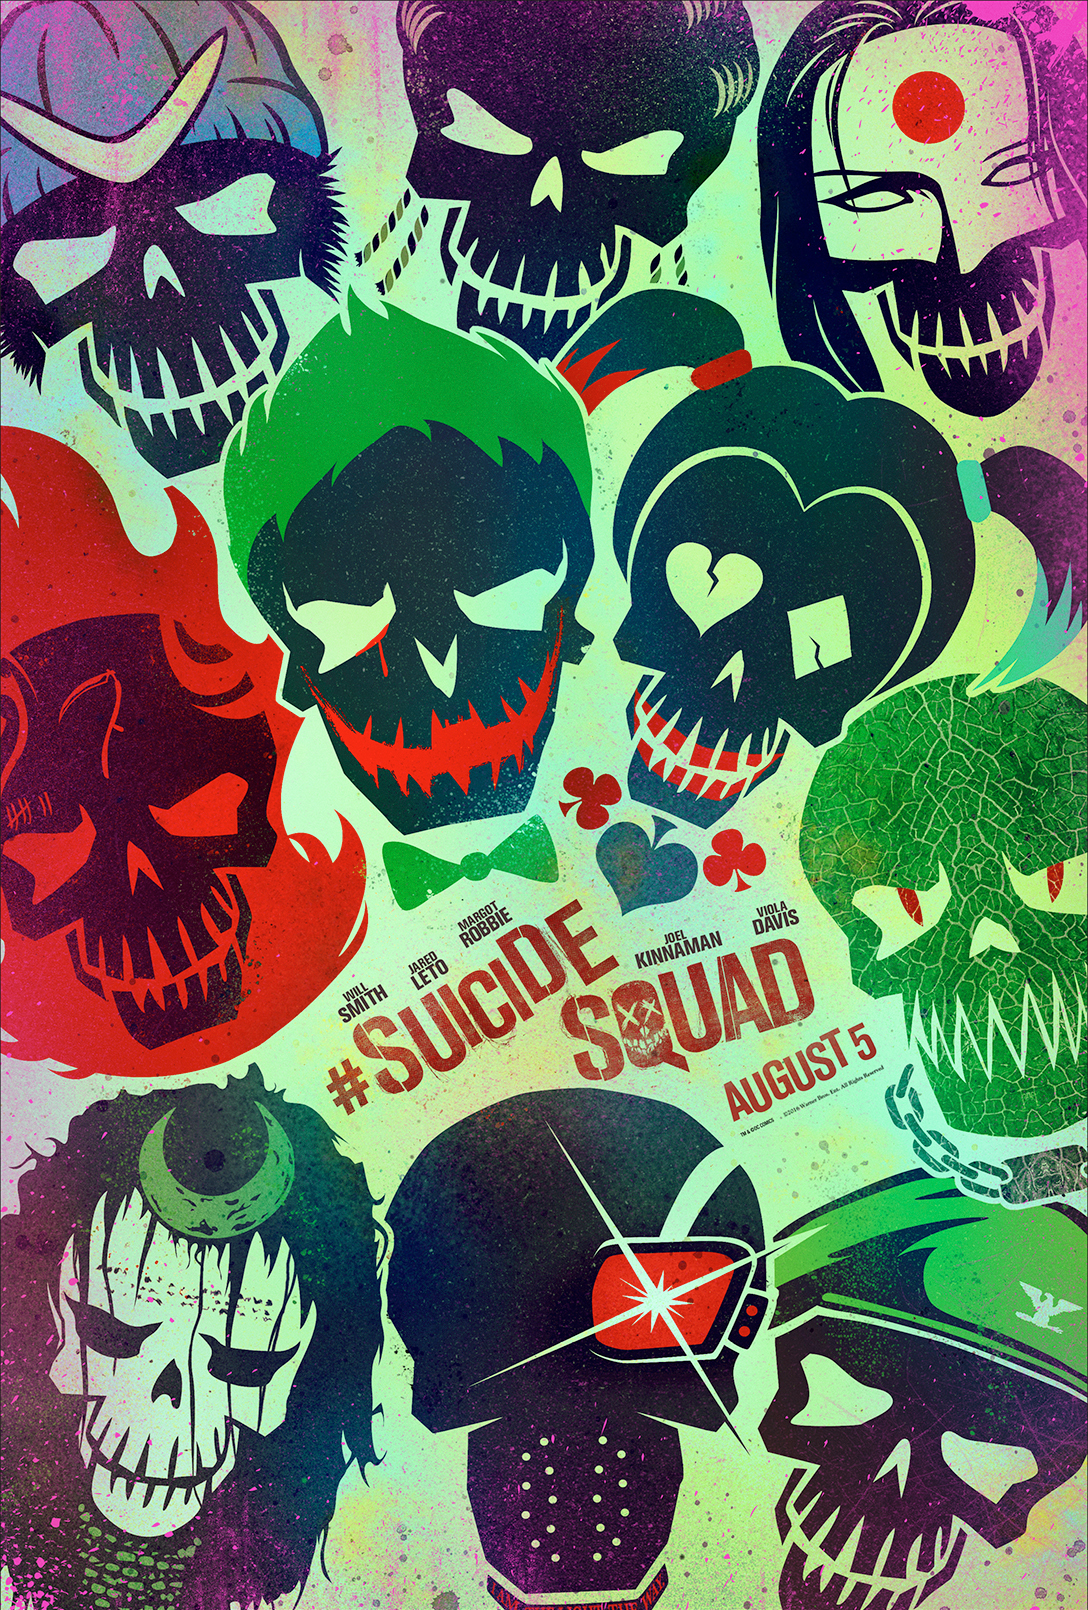 ComicBook NOW on Twitter Fanmade SUICIDE SQUAD poster featuring Jared  Letos Joker by artist CAMW1N httptcoNOKPZAem3o  Twitter